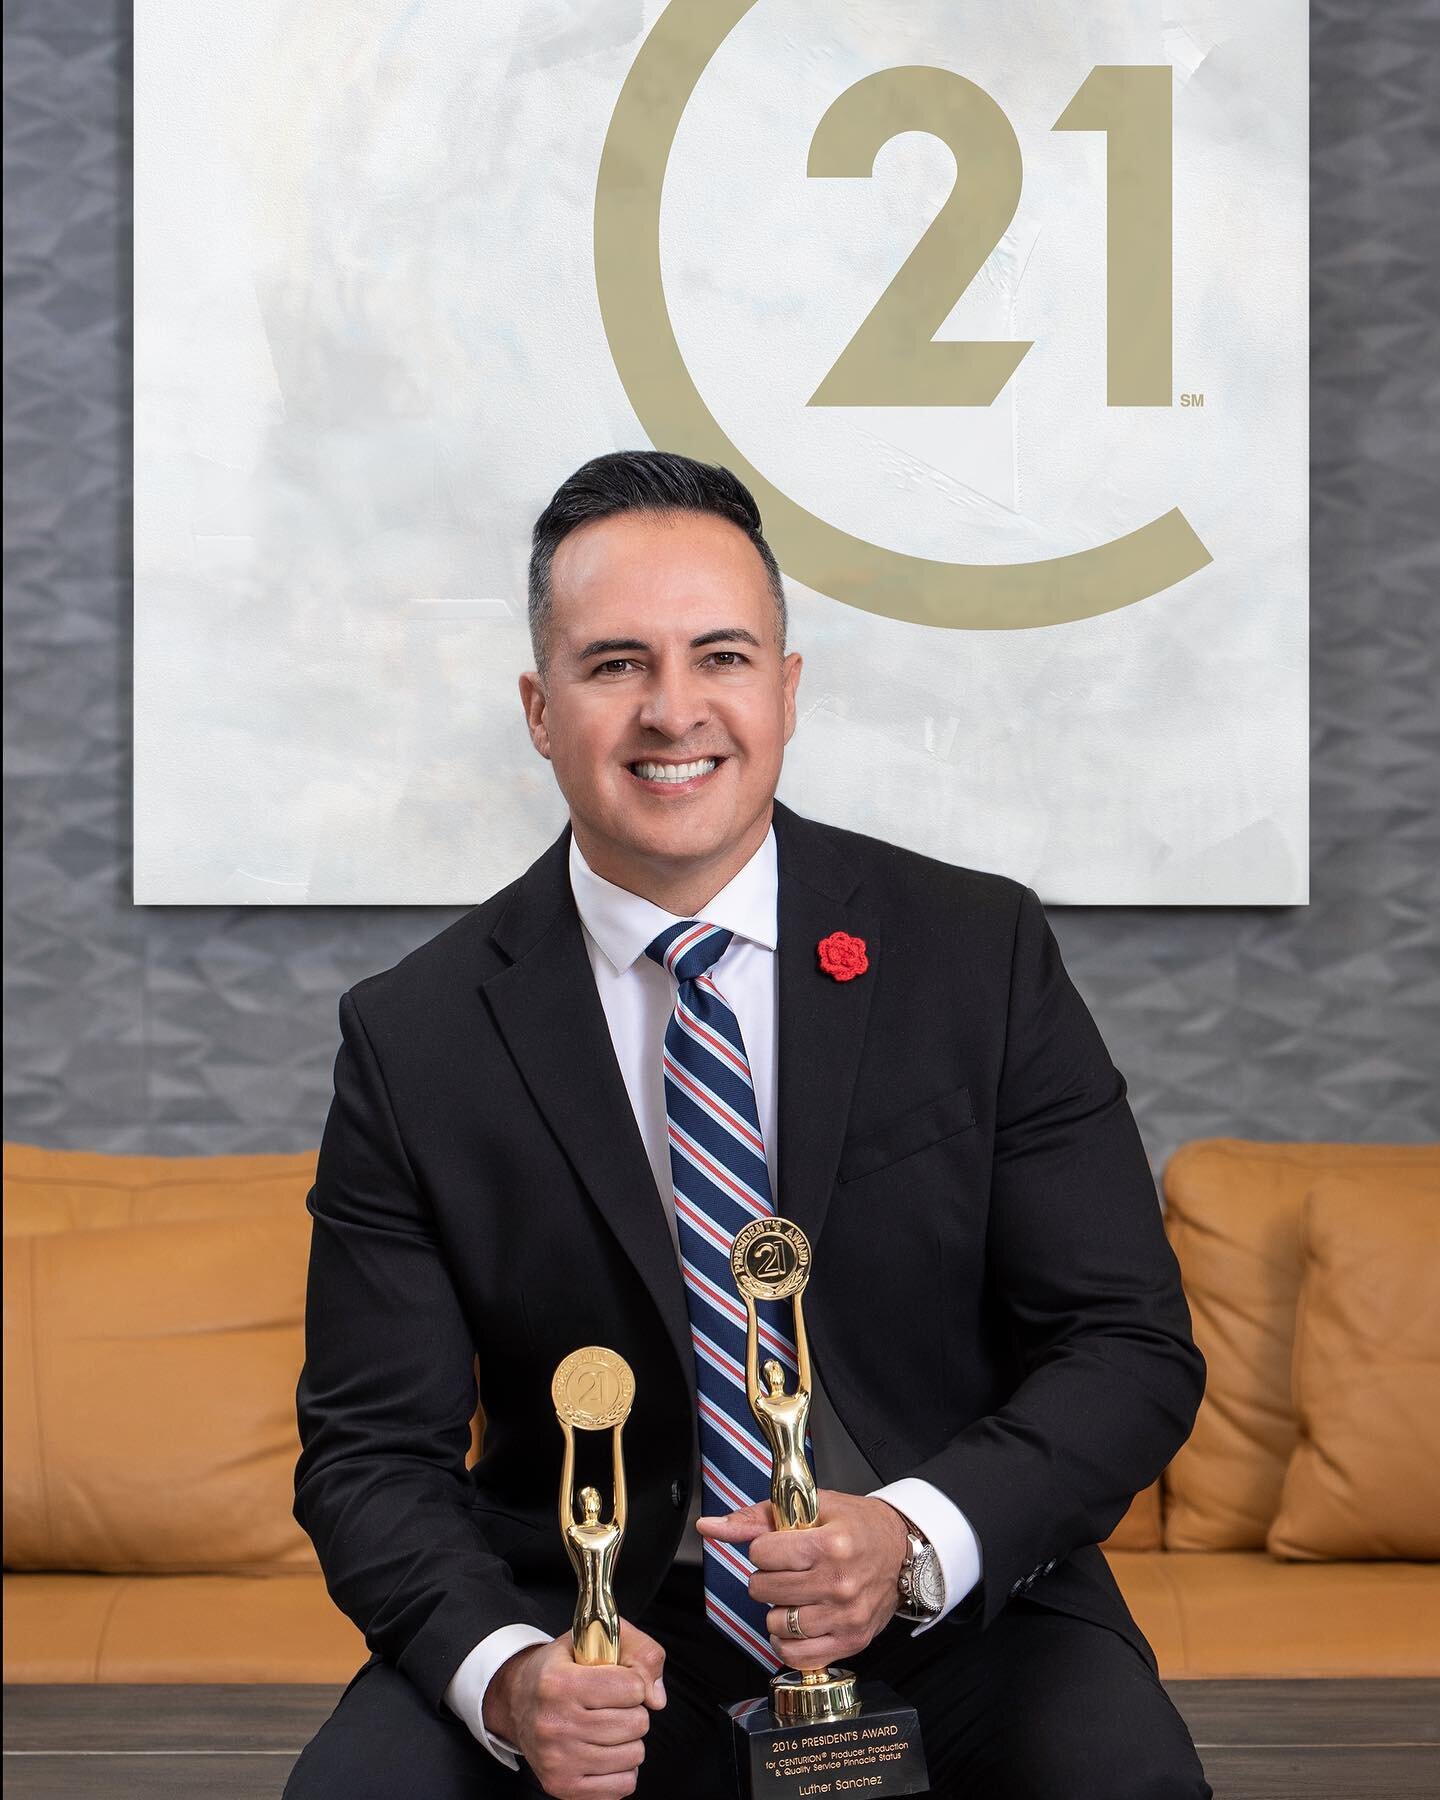 How you do the little things is how you do everything else.

A portrait session with @brokerluther , a consistent top performer and client. 

We appreciate you Luther.

#detailsmatter #topproducer #consistency #century21 #century21allstars #realtor #